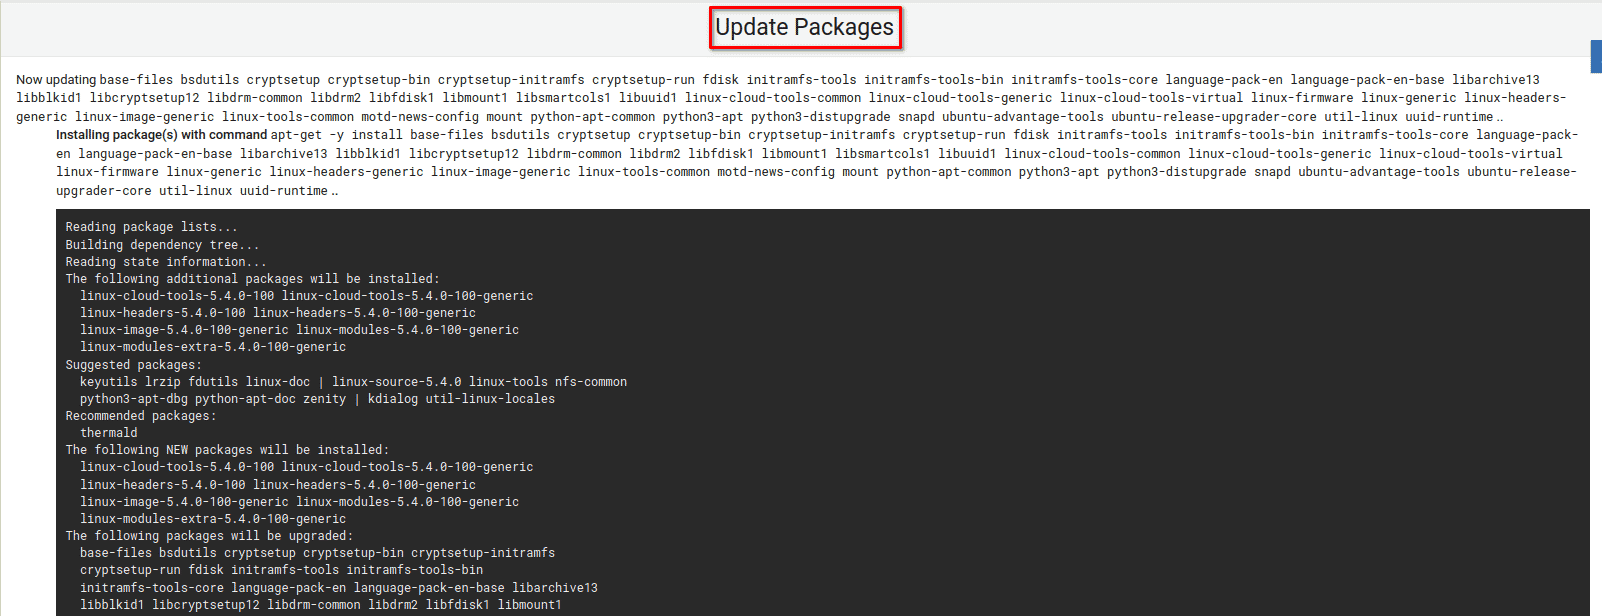 Viewing Running Package Updates